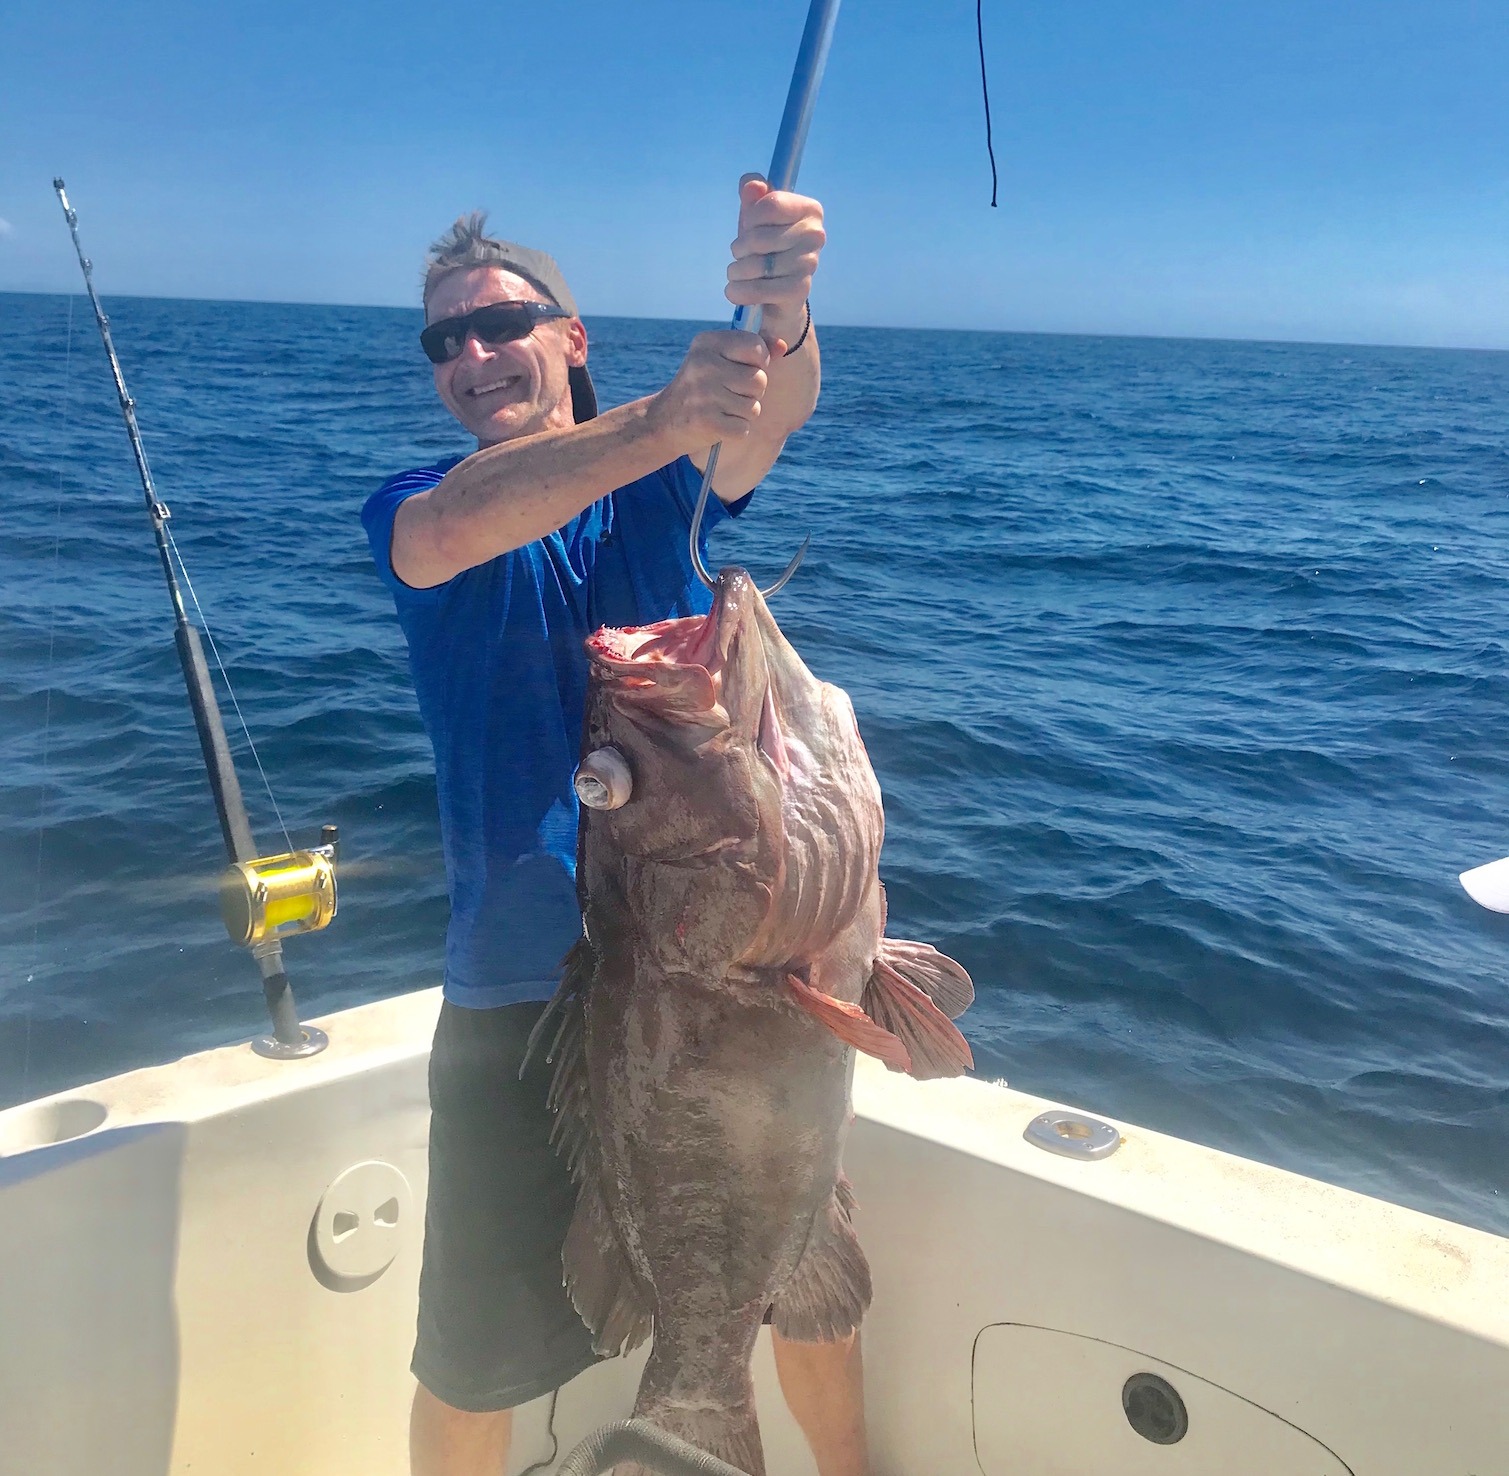 Another grouper caught with Costa Rica Fishing Charters.